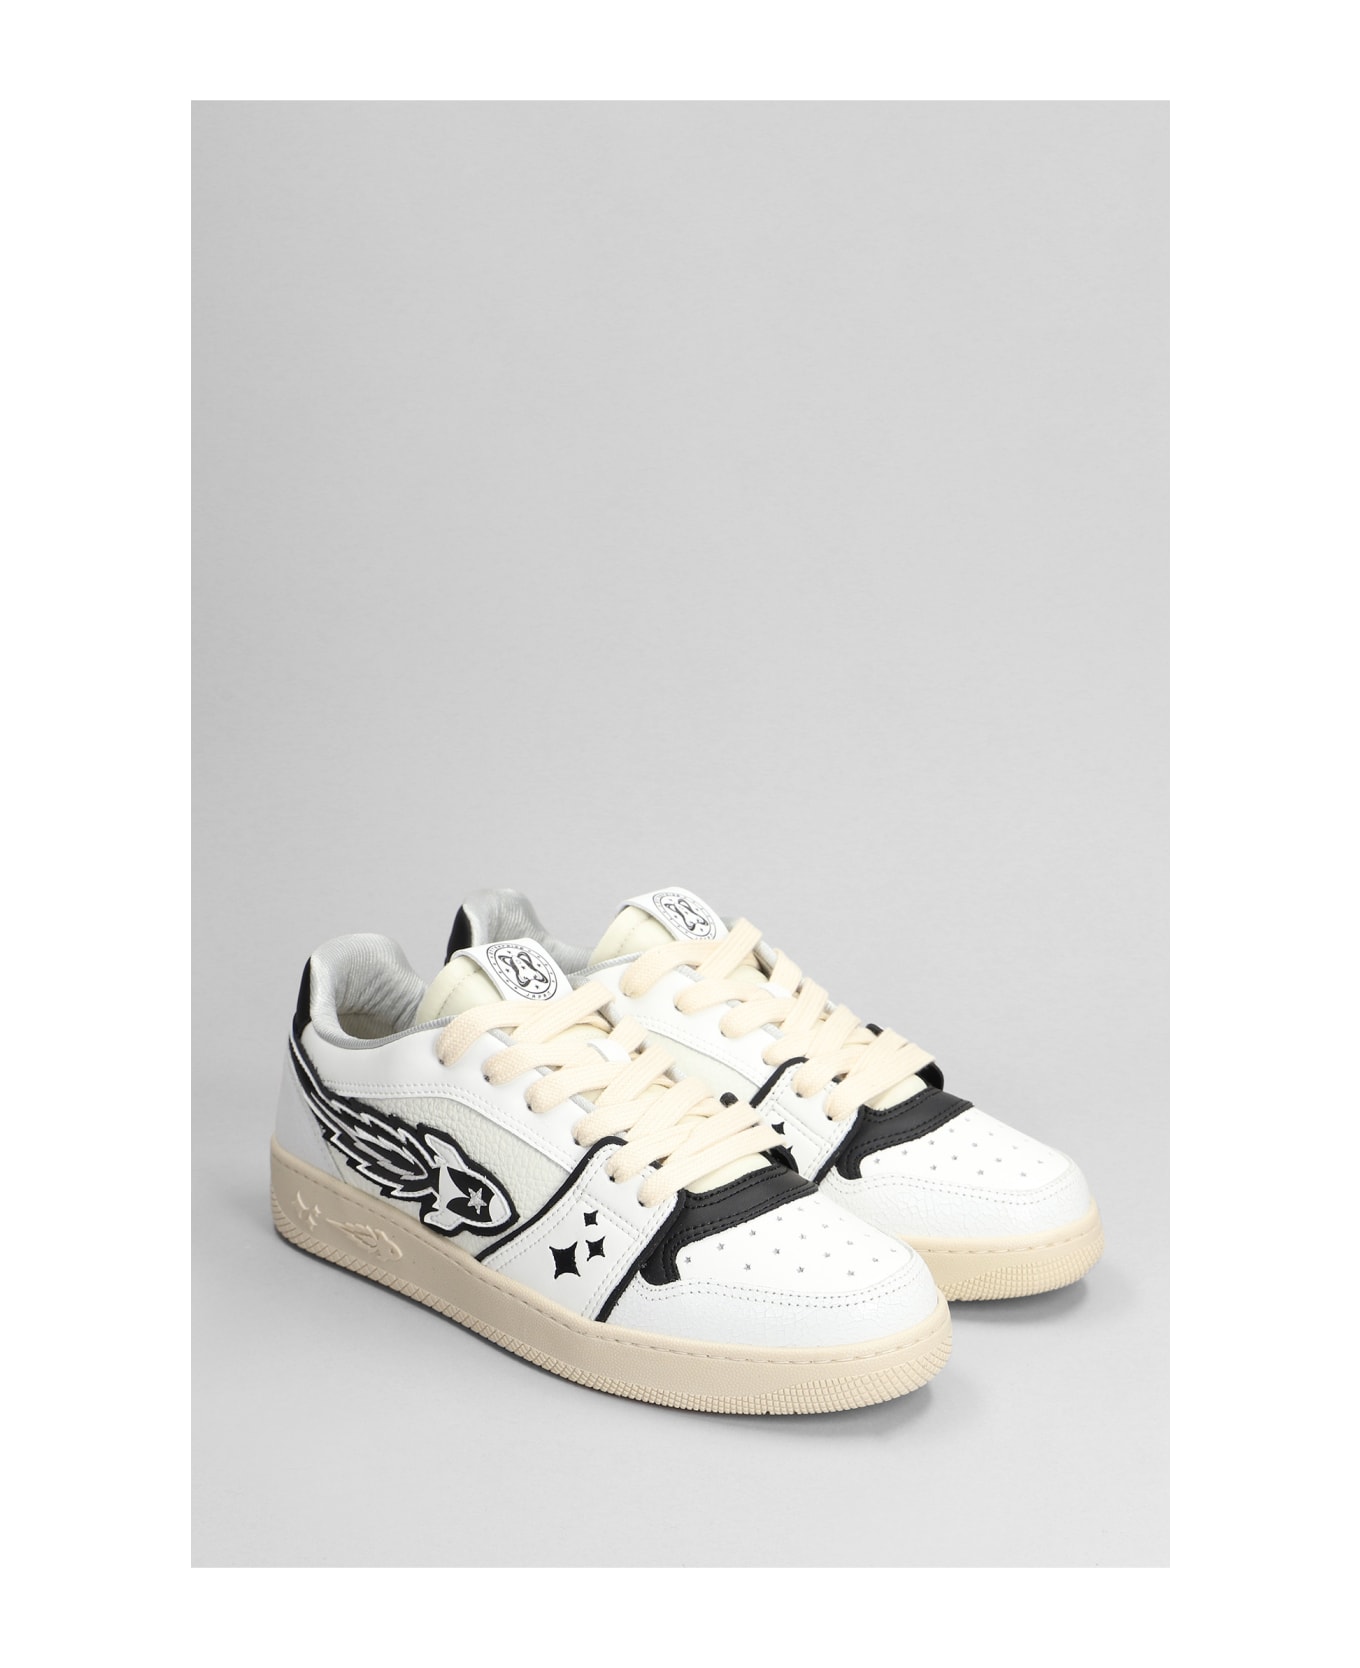 Enterprise Japan Sneakers In White Leather - white